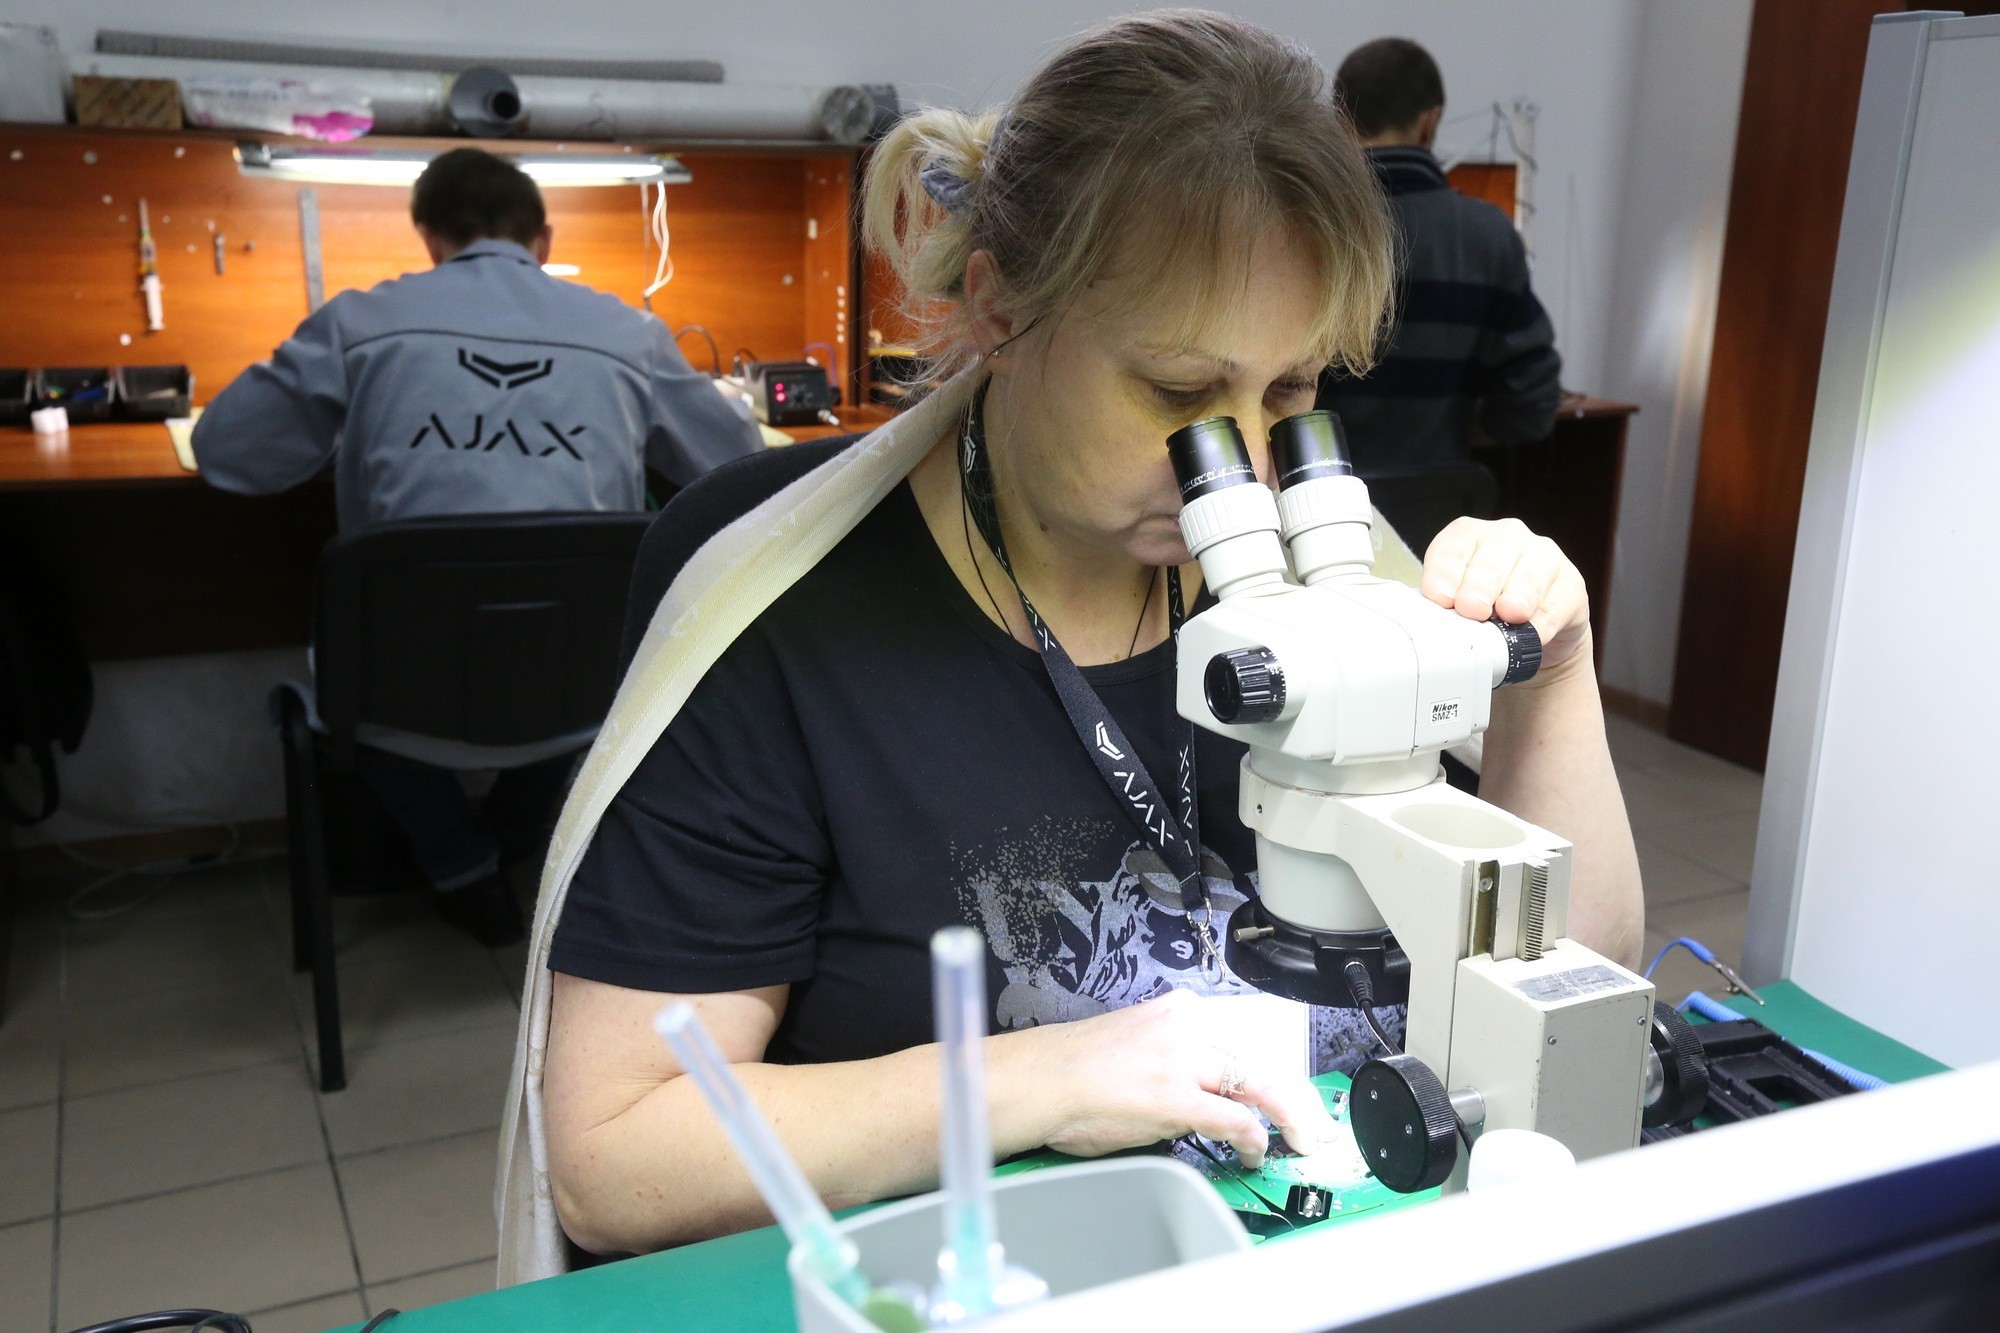 A woman employed by Ajax looks into the microscope.